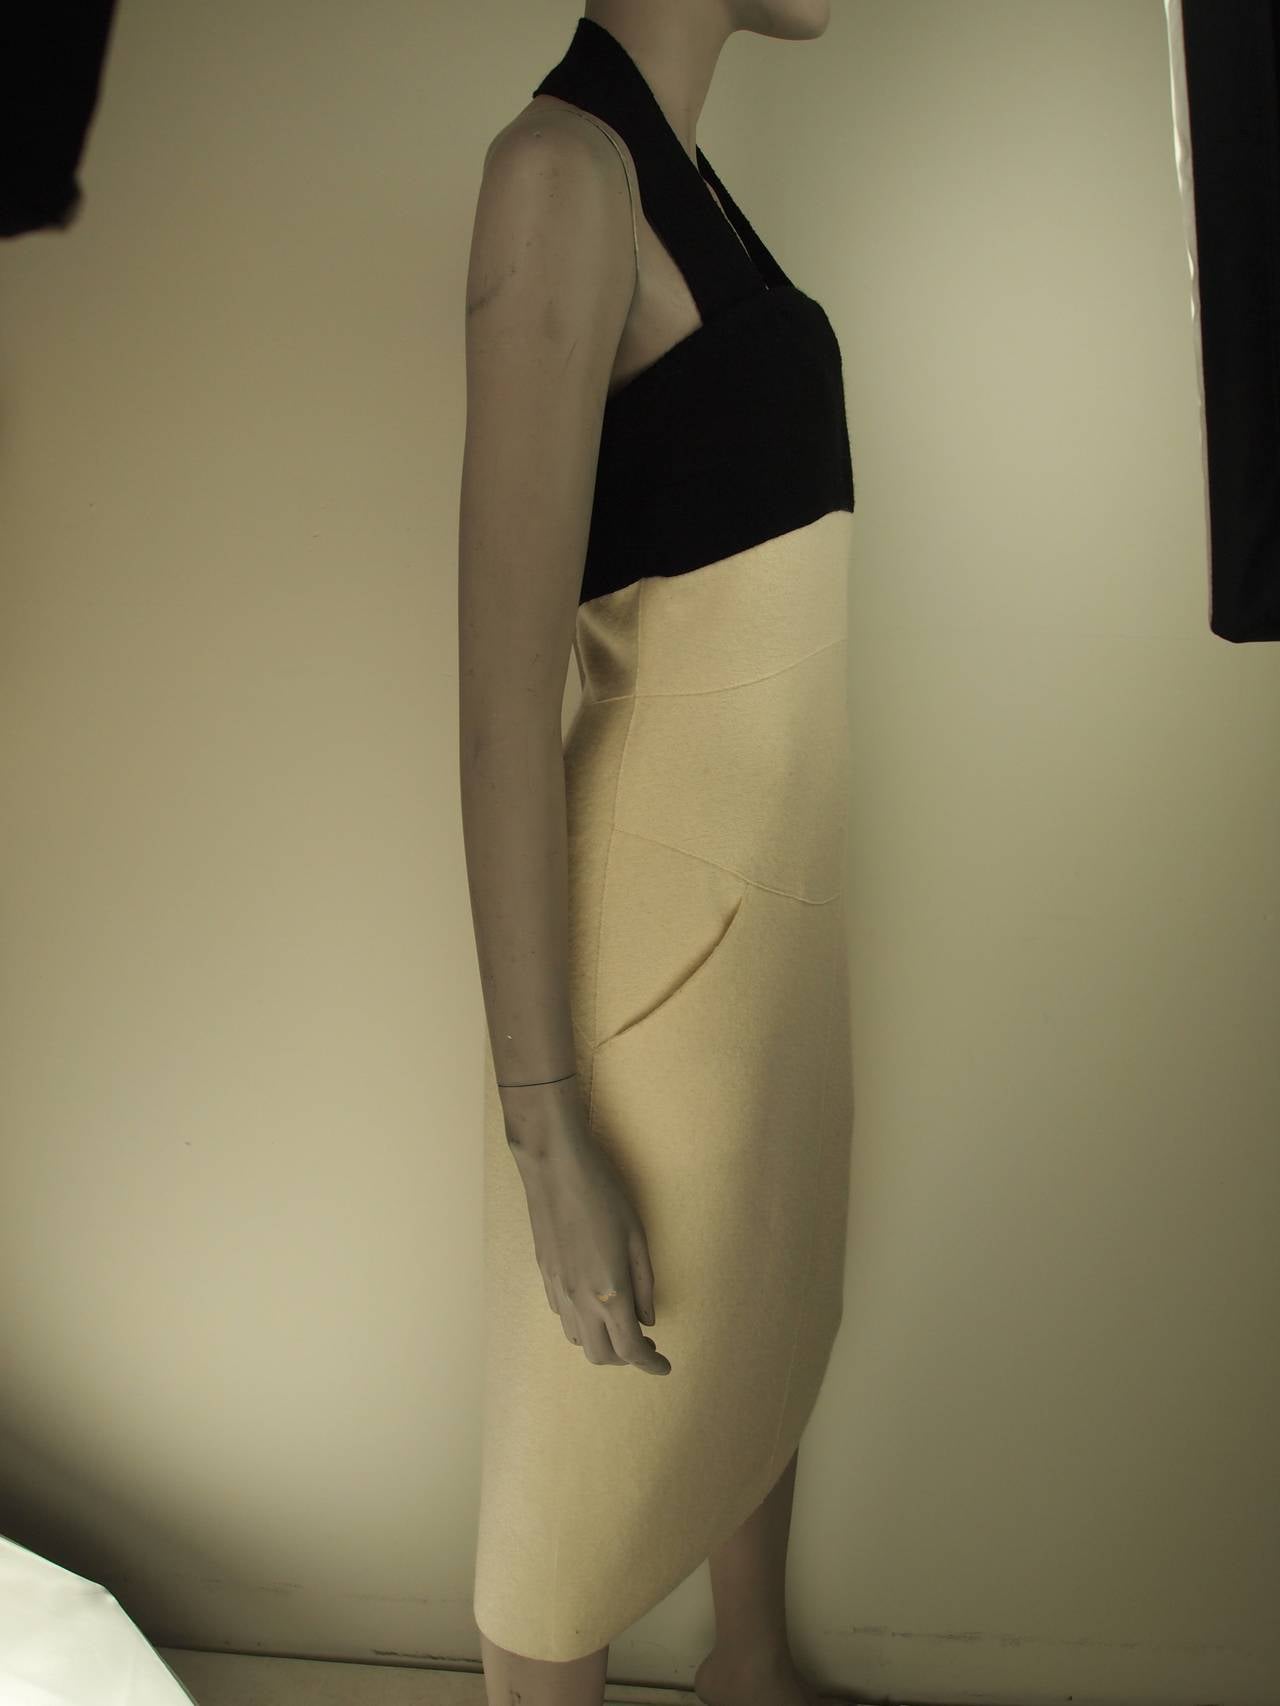 Chanel, autumn/winter 1999,creme and black colorblock sheath halter dress with removable shoulder strap, two front pockets at waist and back button,concealed zip closure and fully lined in silk.
Bust 32”, Waist 28”, Hip 19”, Length 44”
Fabric